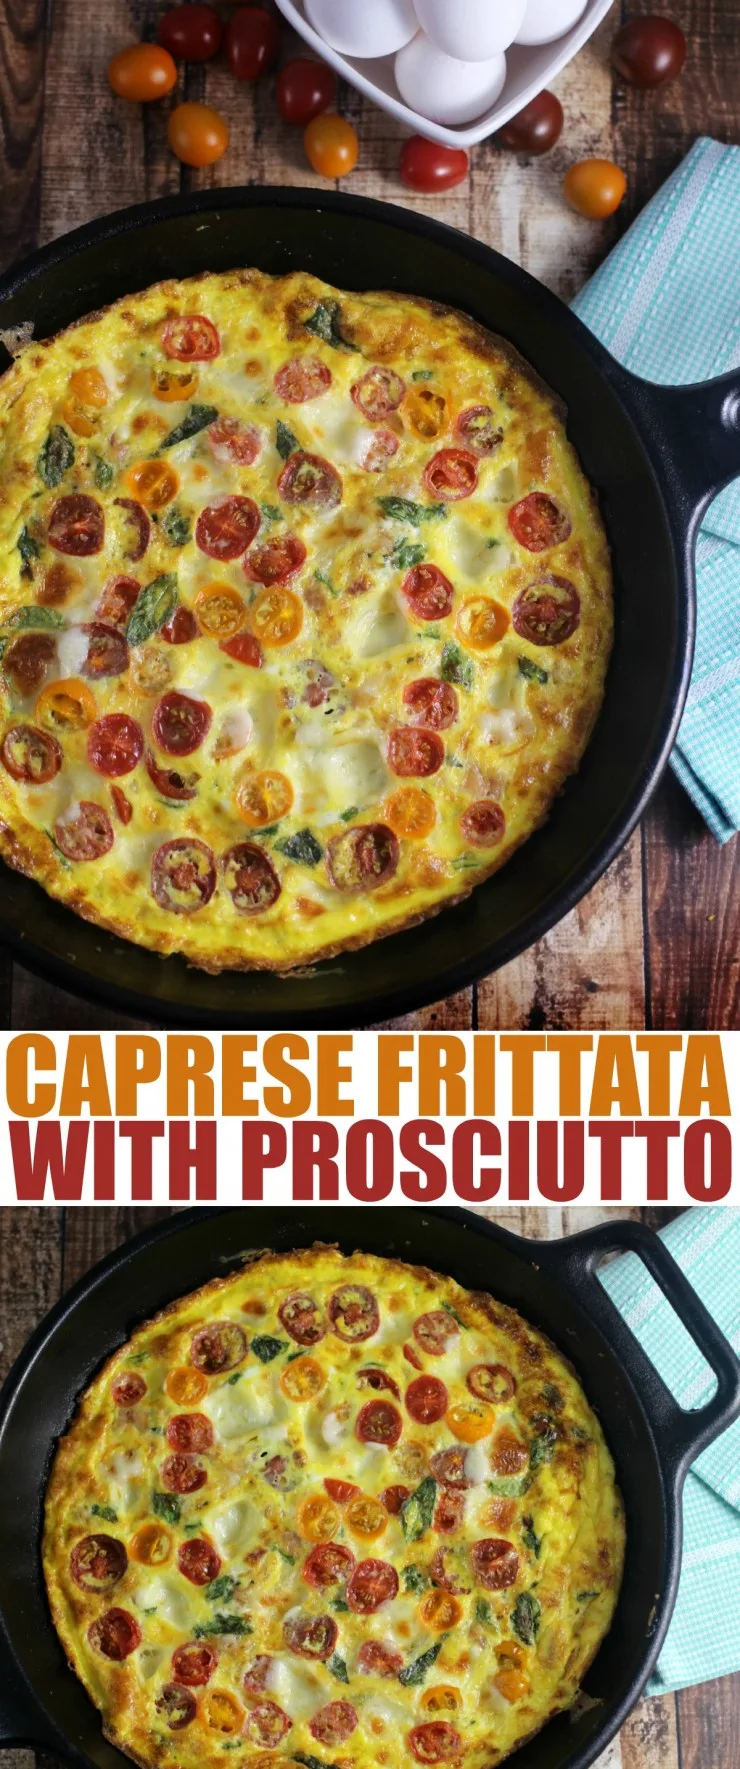 This Caprese Frittata with Prosciutto is perfect for breakfast or even a family dinner served with salad. It's full of bursts of tomato & creamy cheese.